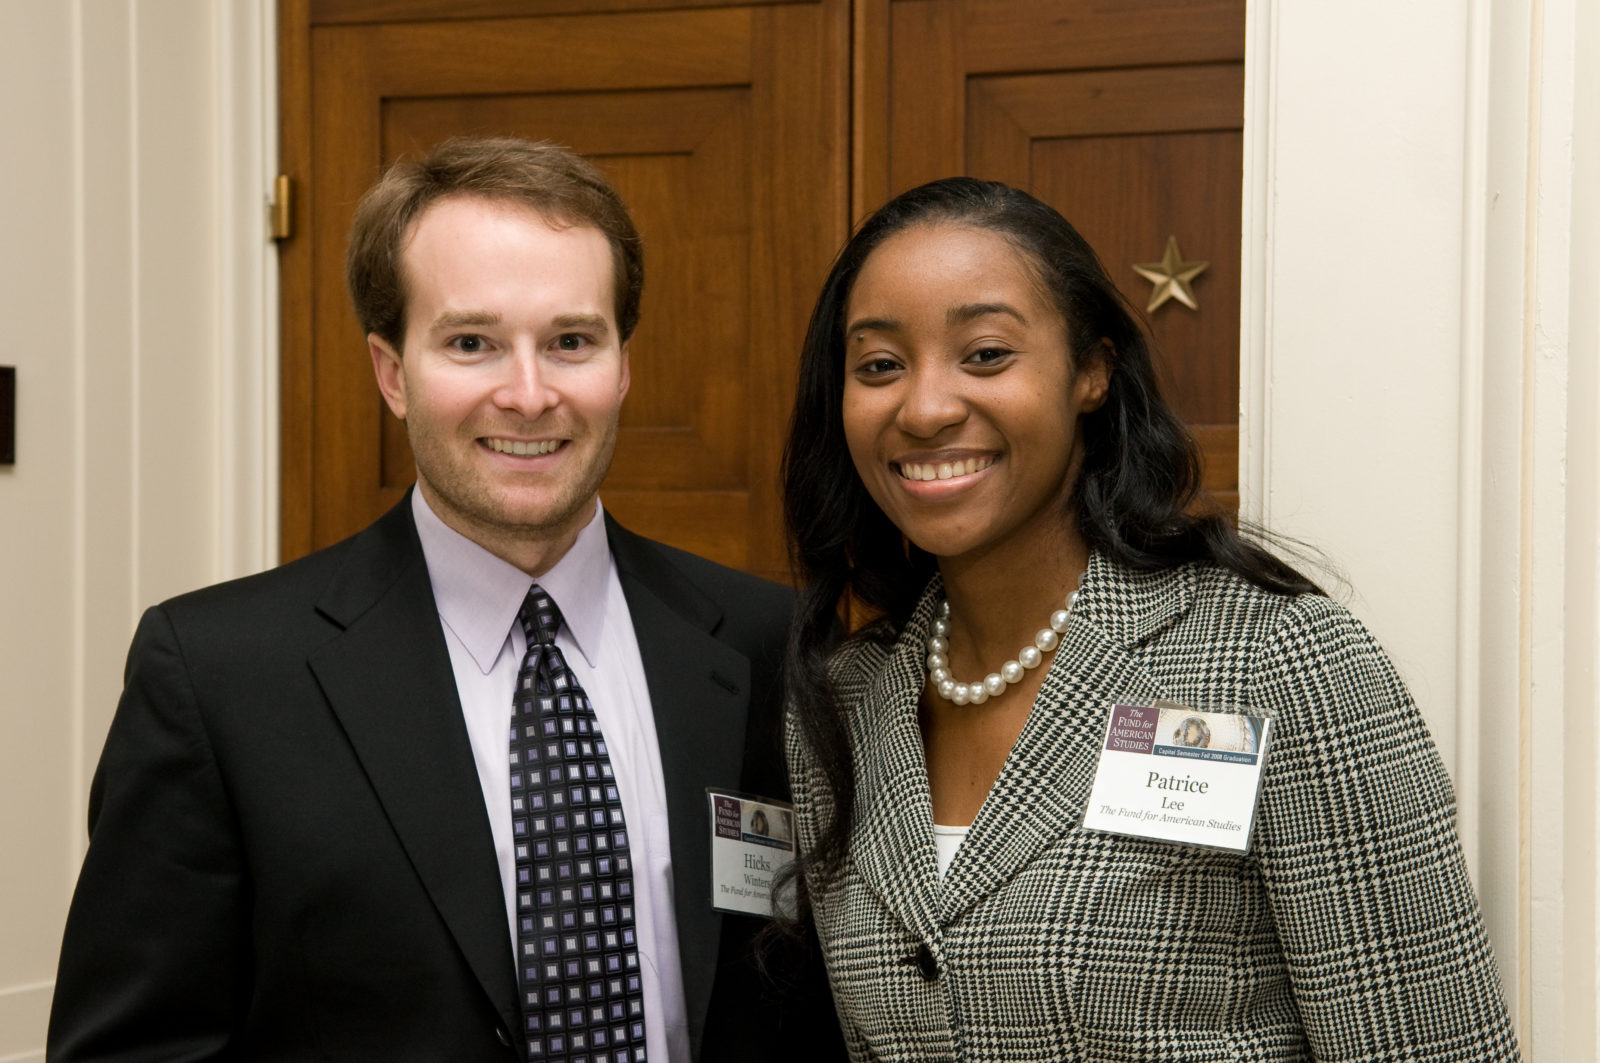 Throughout 2008-2009, TFAS has hosted a Koch Associate, Patrice Lee (right), to manage media relations.